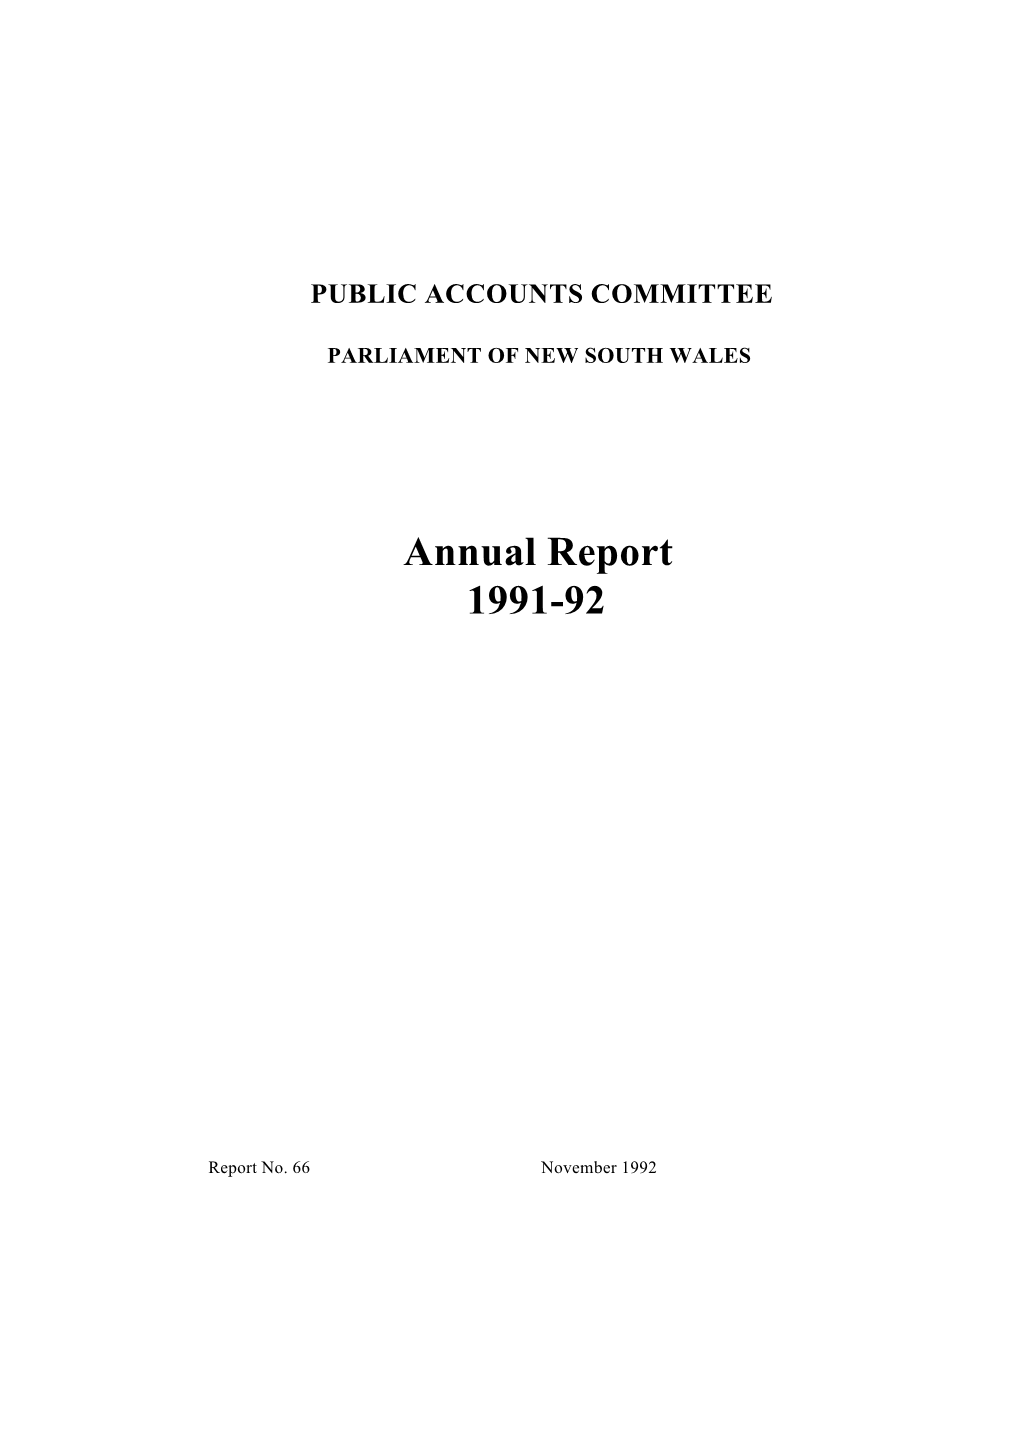 Annual Report for the Year Ended 30 June 1992